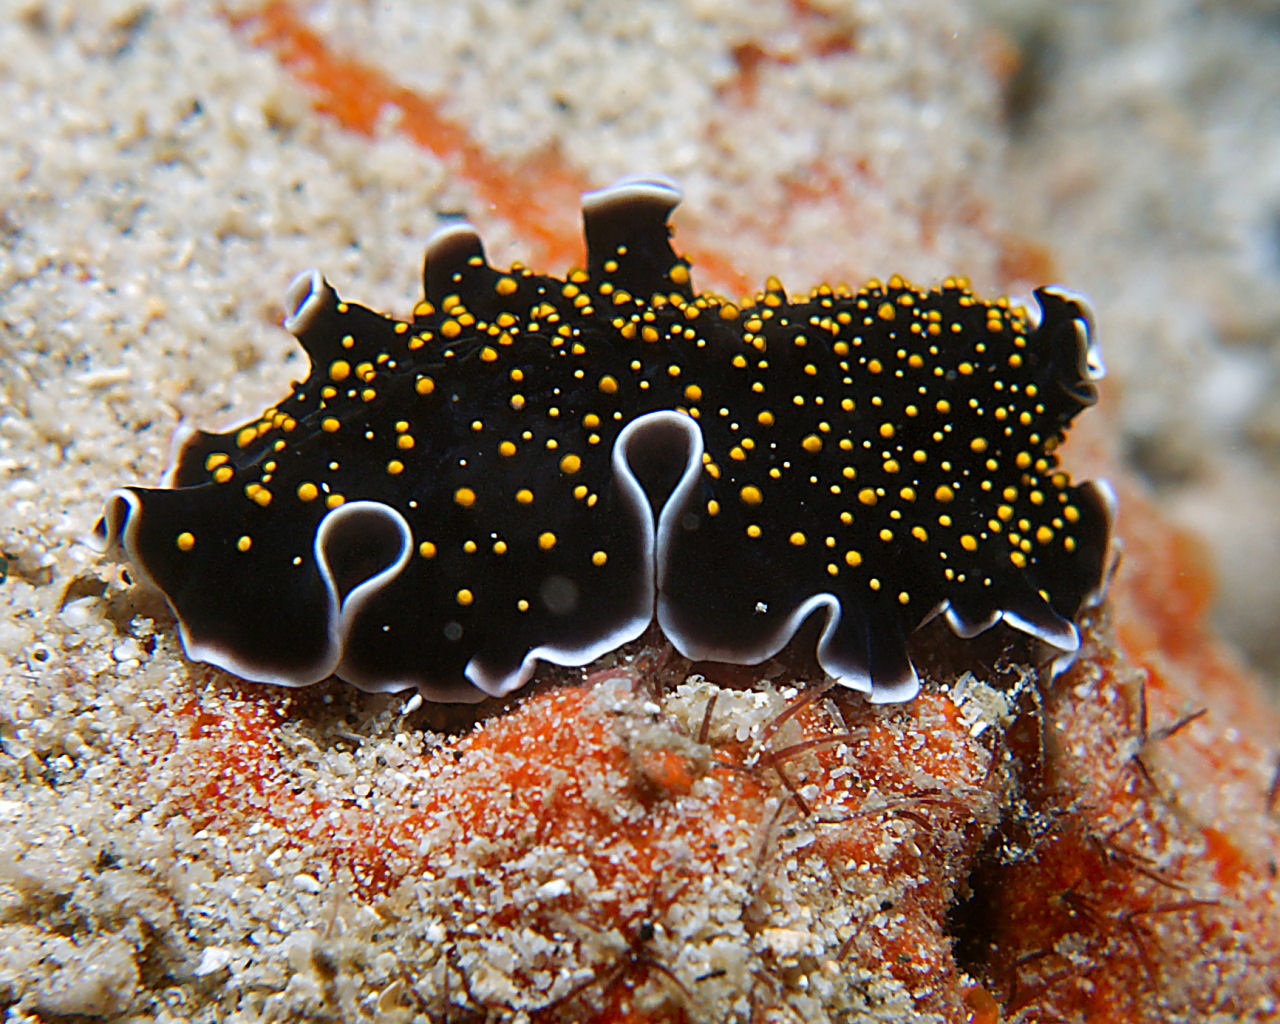 Flatworm at Reef Orf